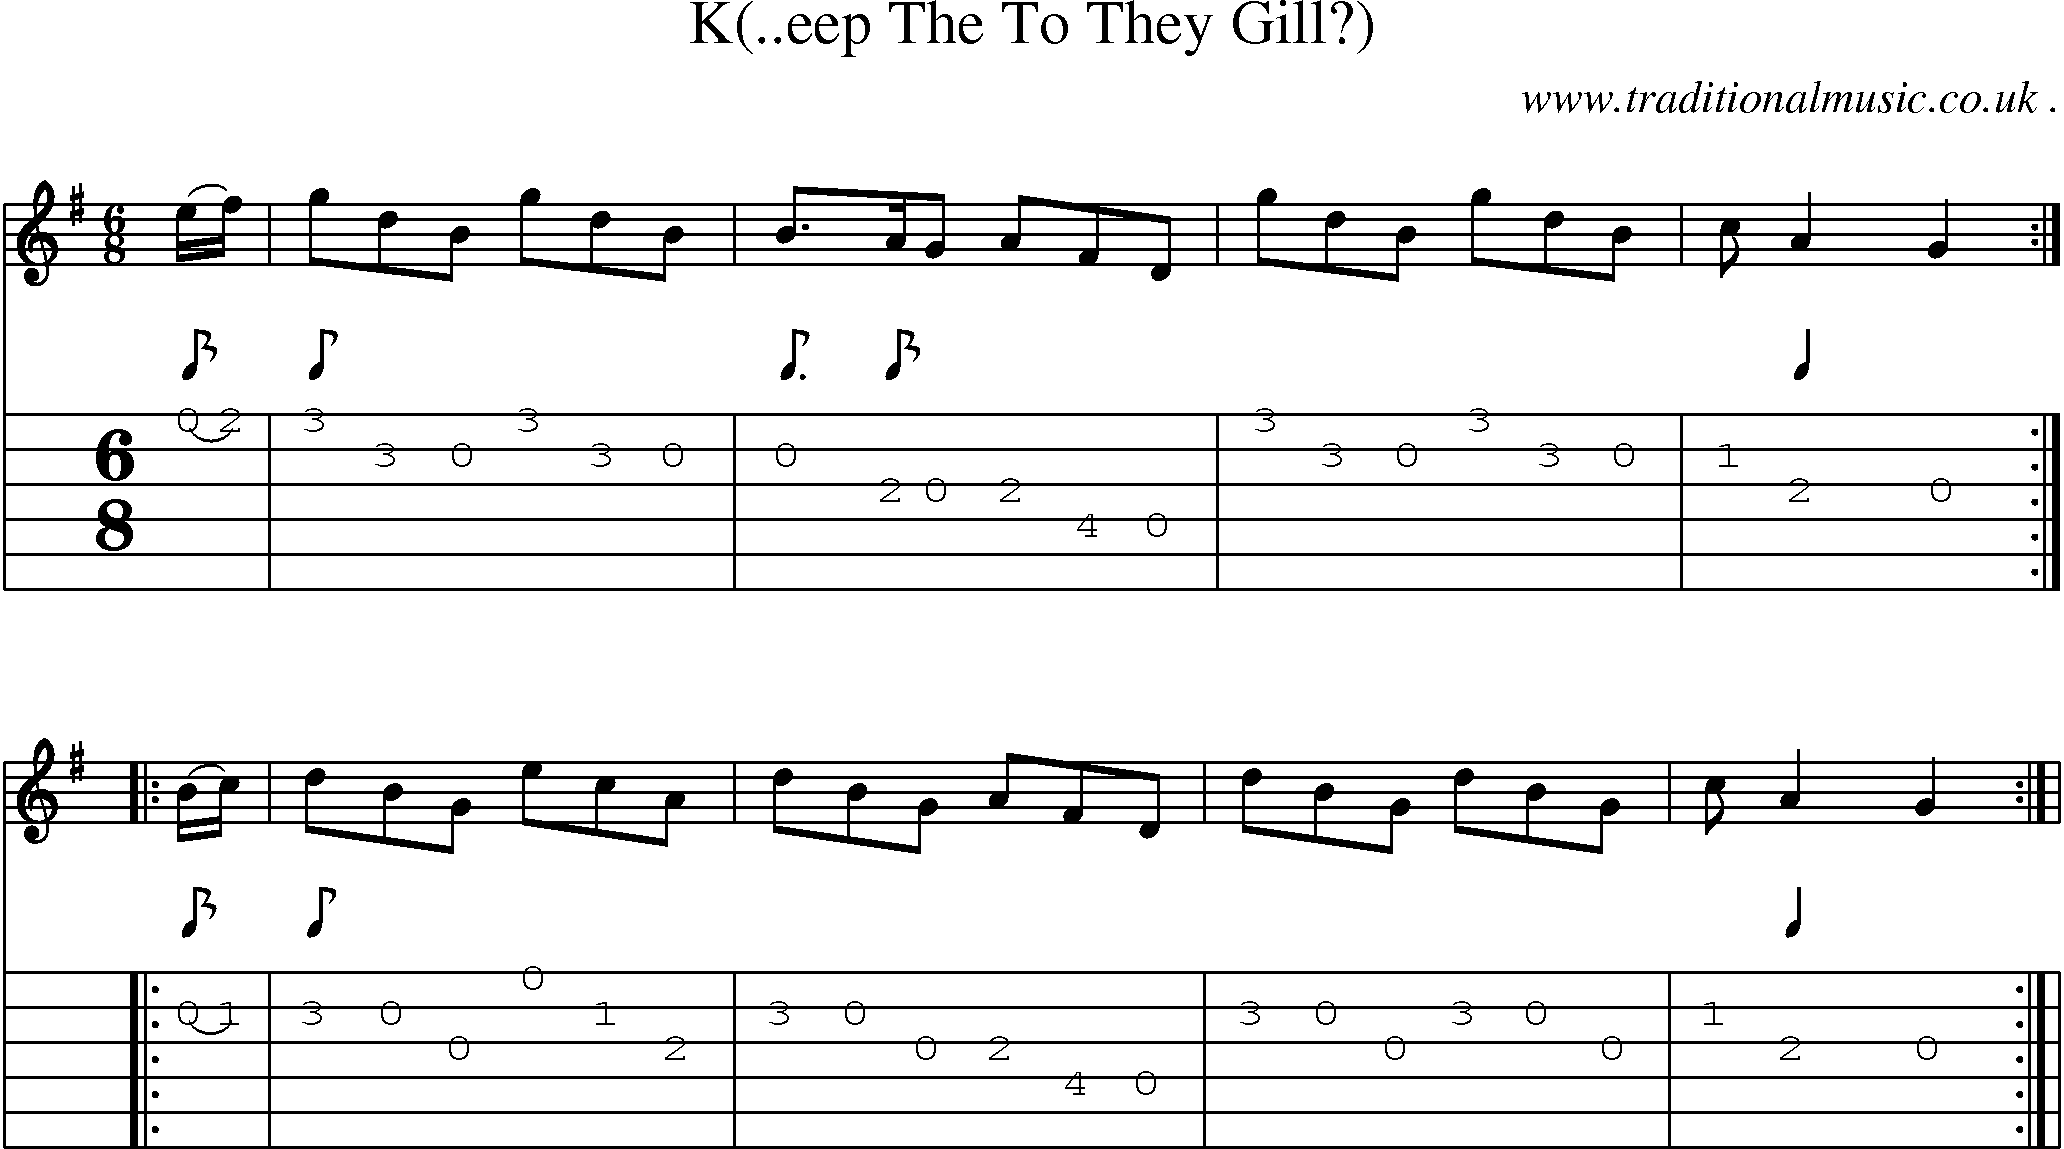 Sheet-Music and Guitar Tabs for K(eep The To They Gill)